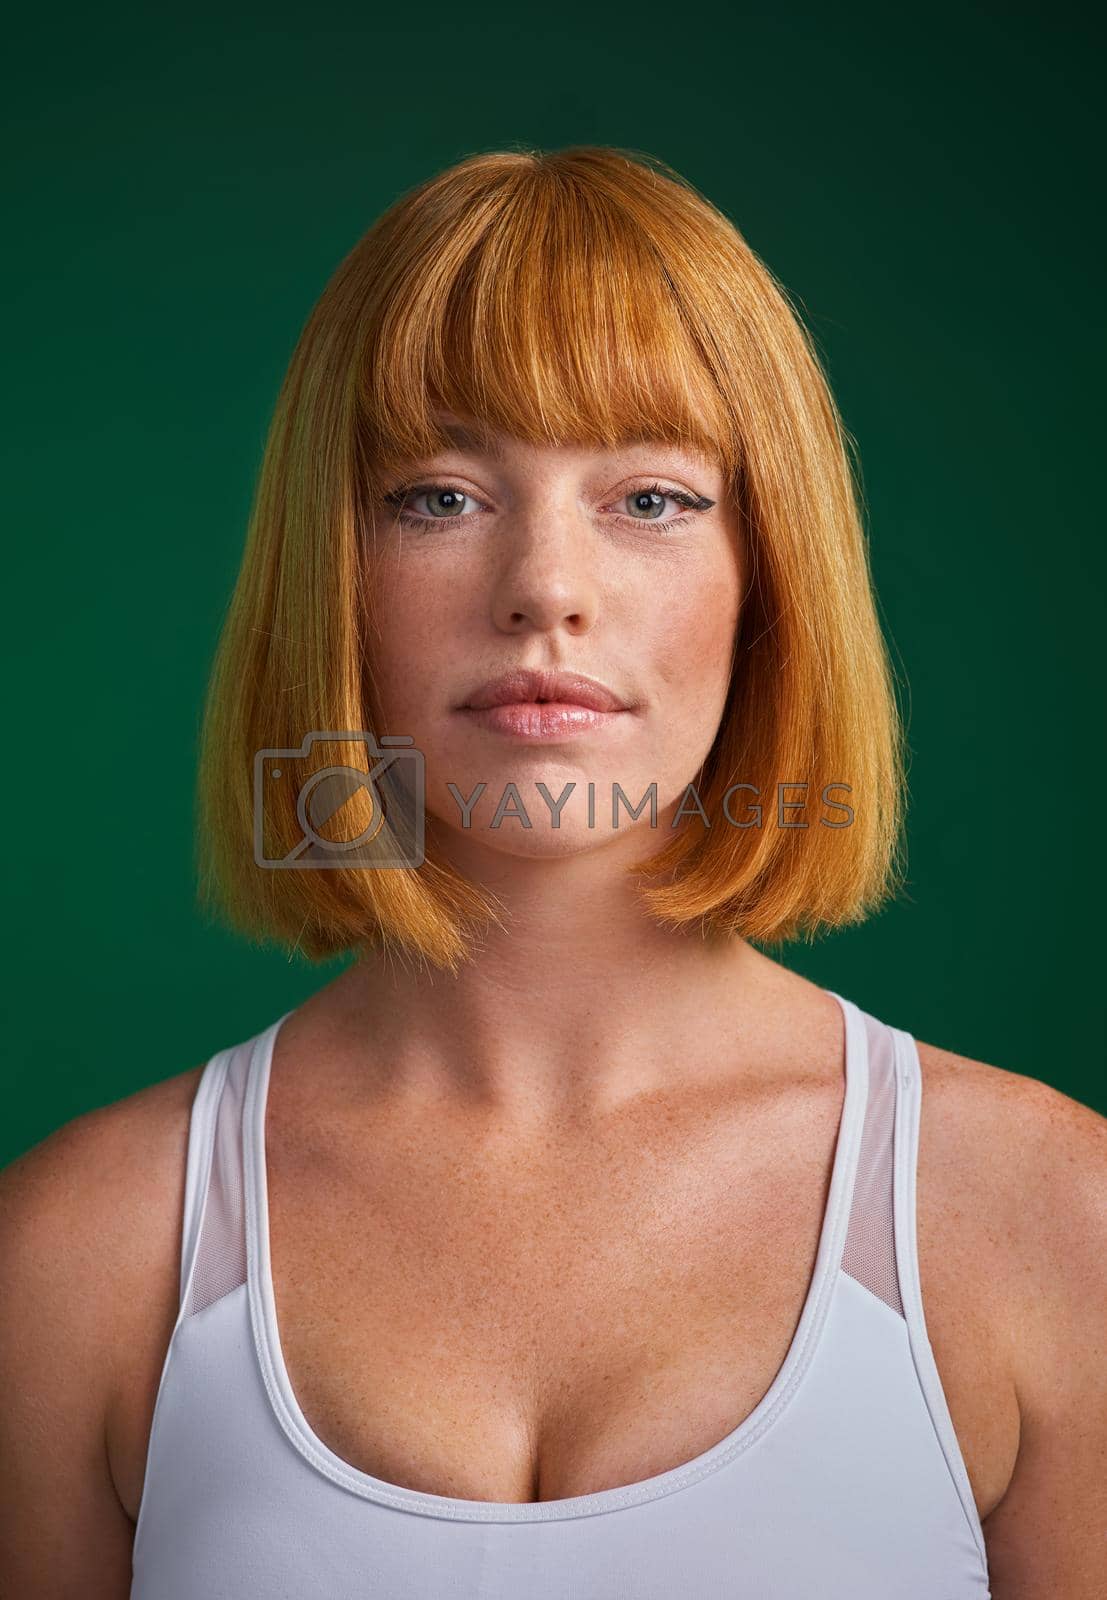 Cropped portrait of an attractive young sportswoman standing alone against a green background in the studio.